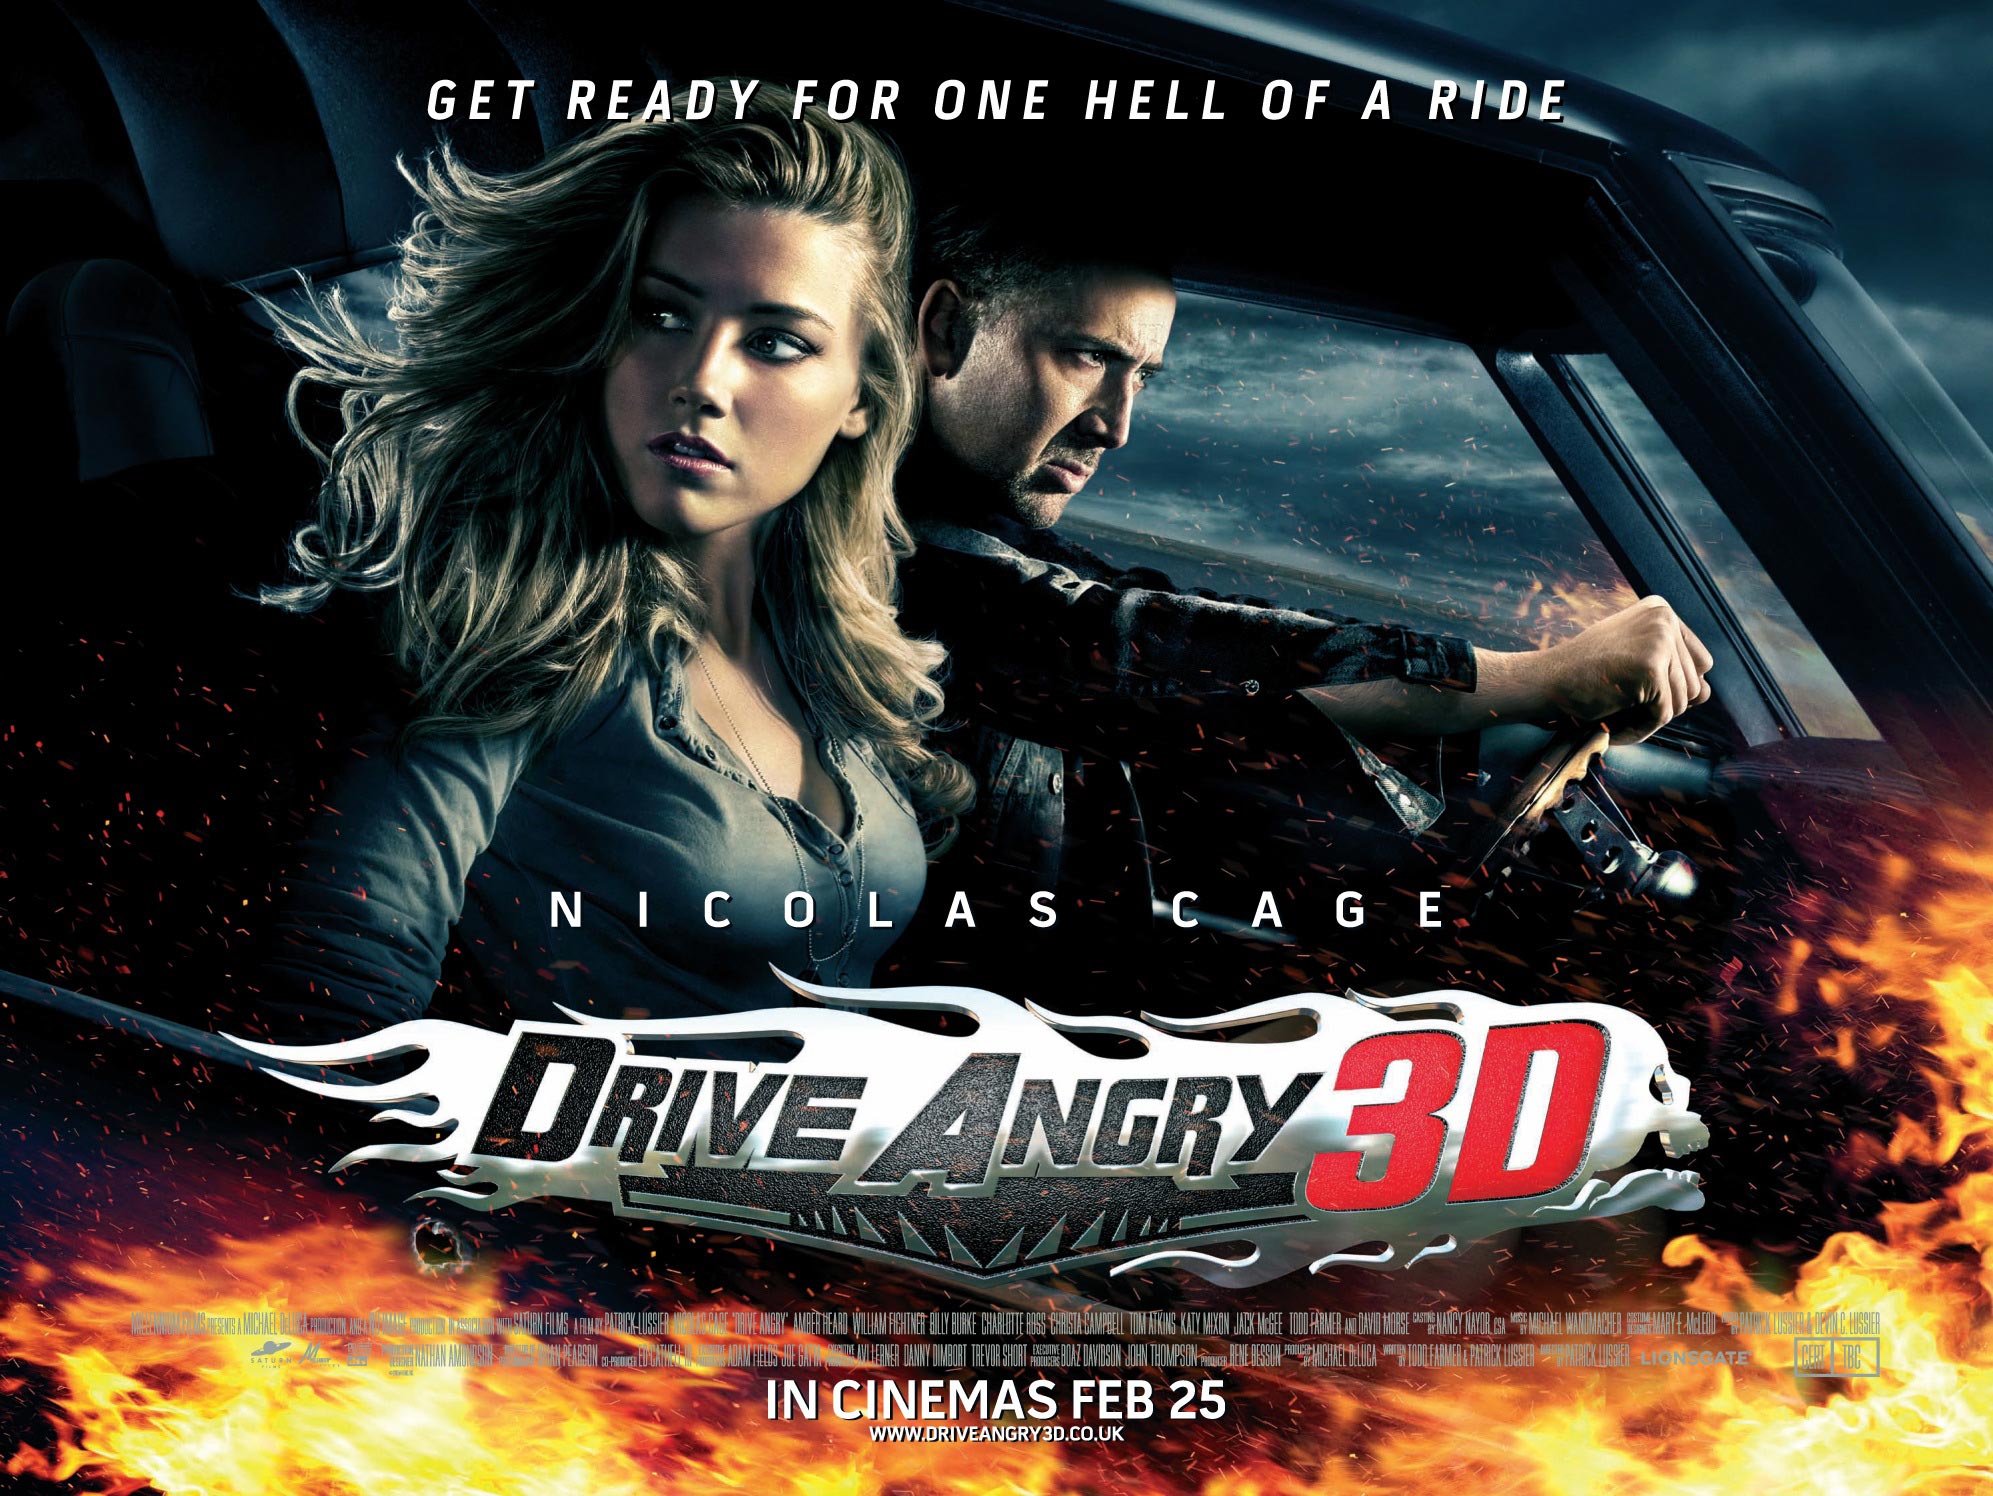 driveangry_poster